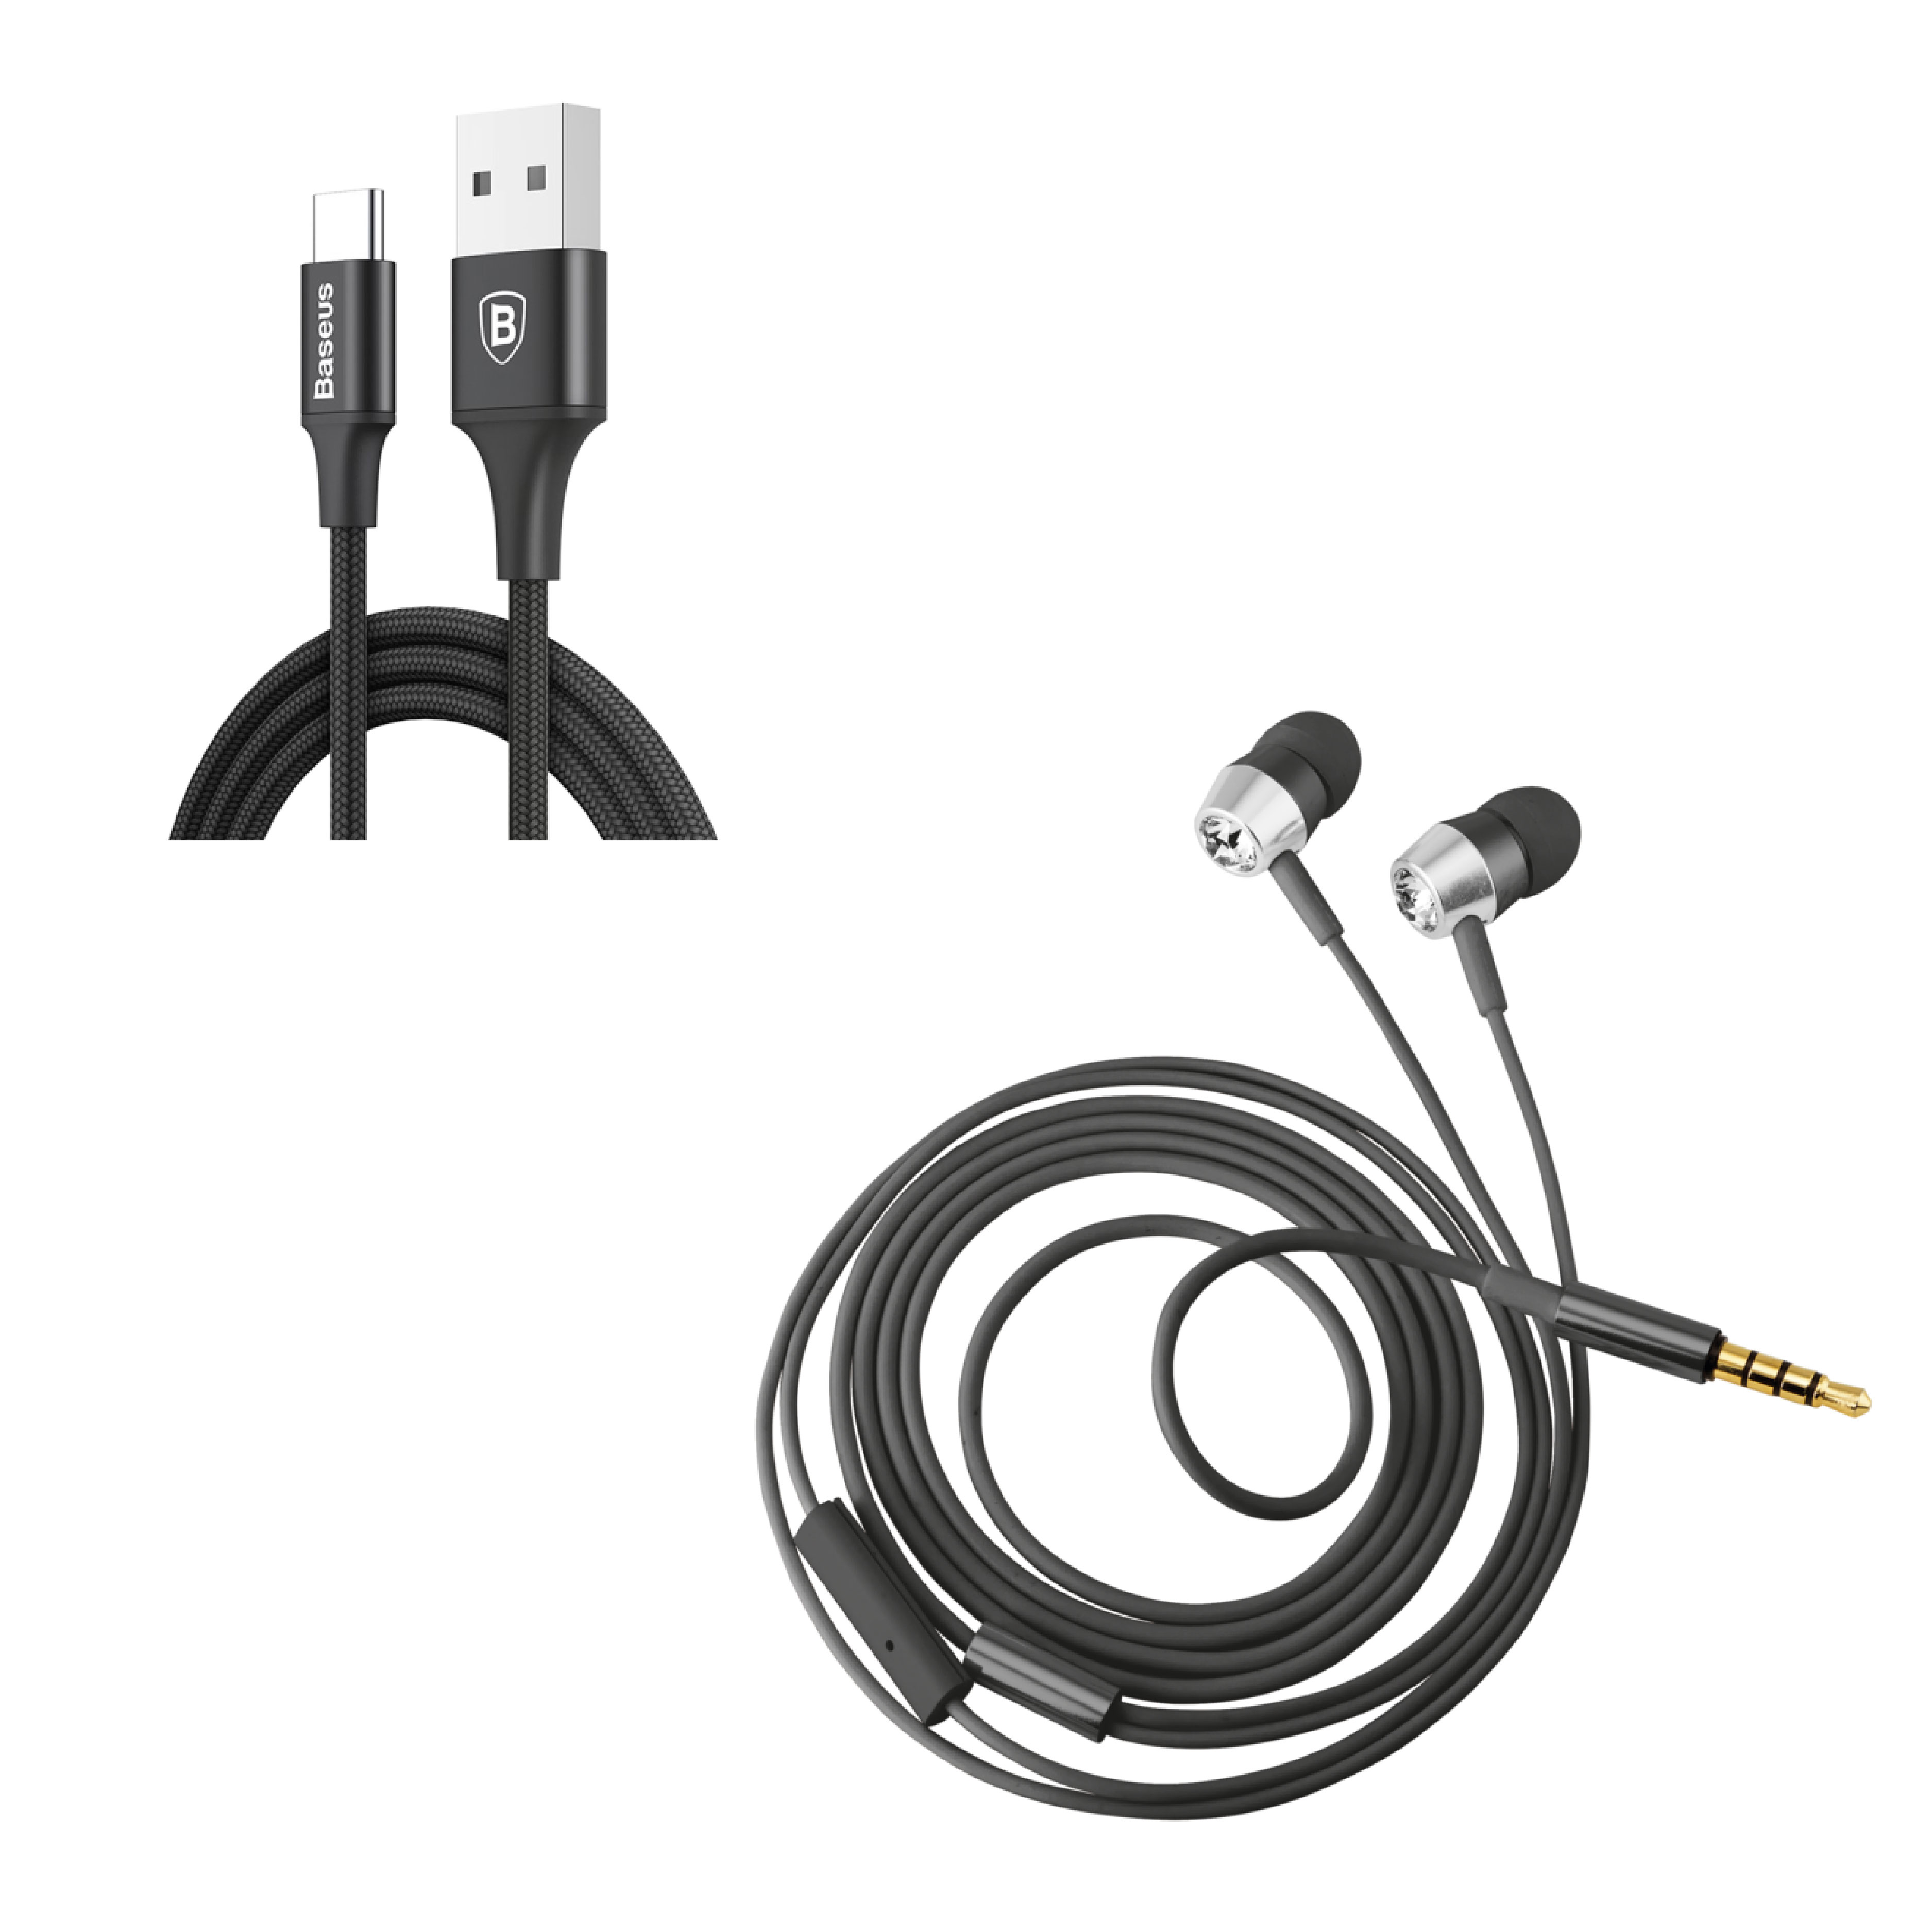 Mobiles Stereo Headphone or Single Charger cable	